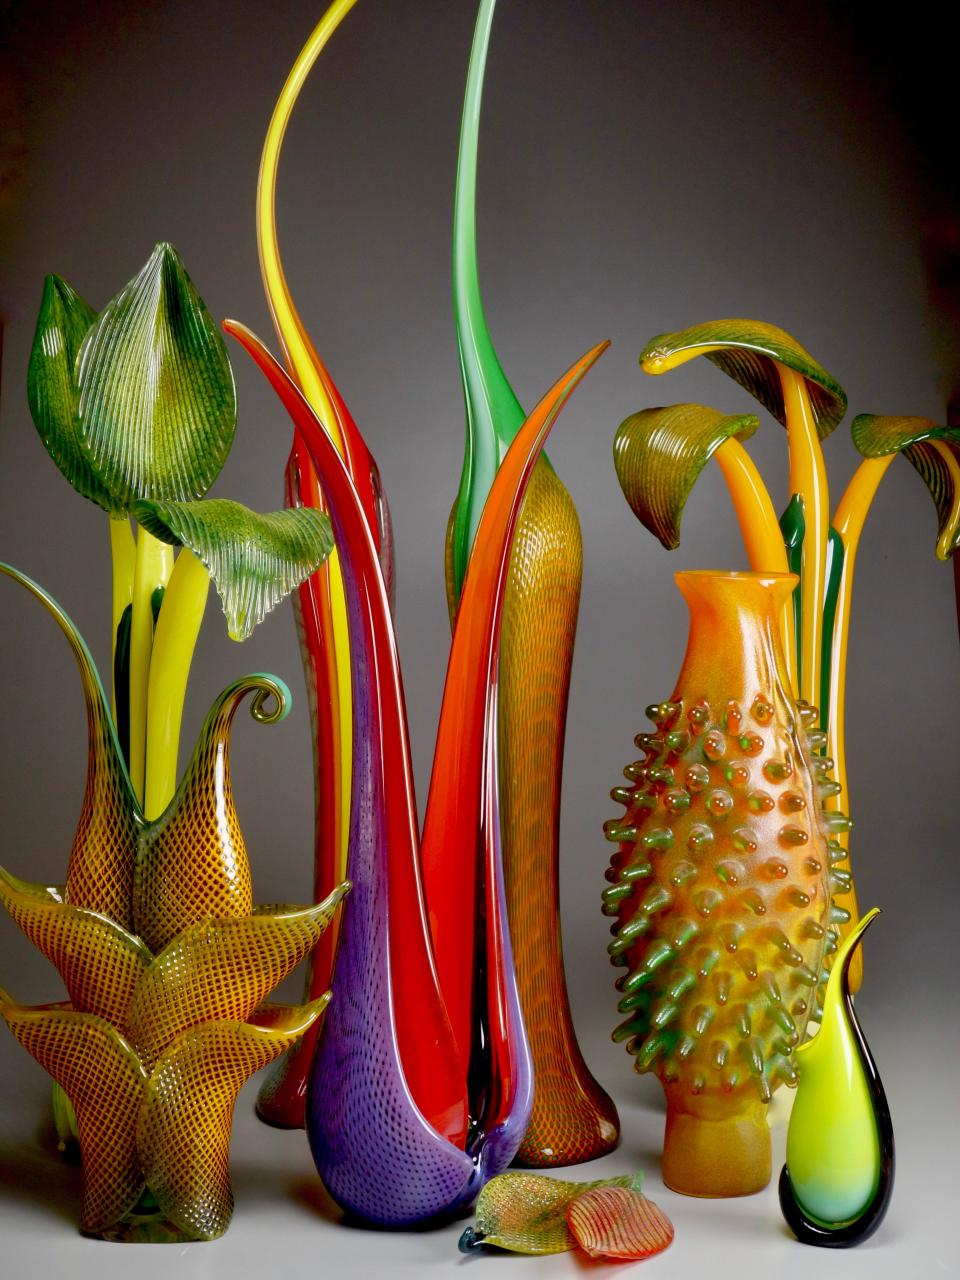 Glass artist Ed Branson's work is inspired by nature.